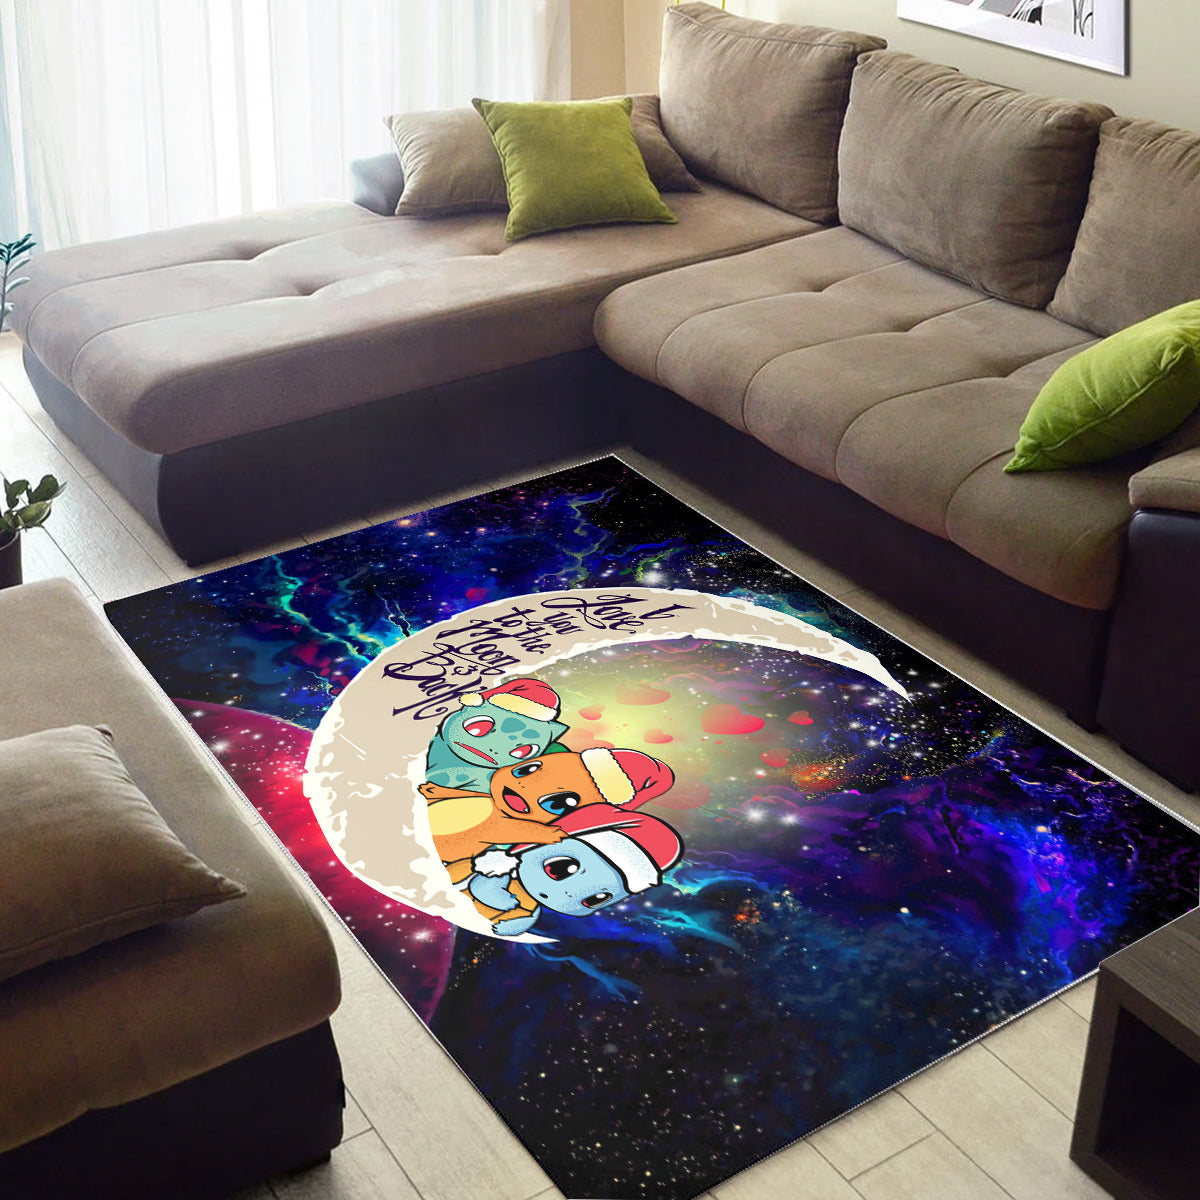 Pokemon Friends Gen 1 Love You To The Moon Galaxy Carpet Rug Home Room Decor